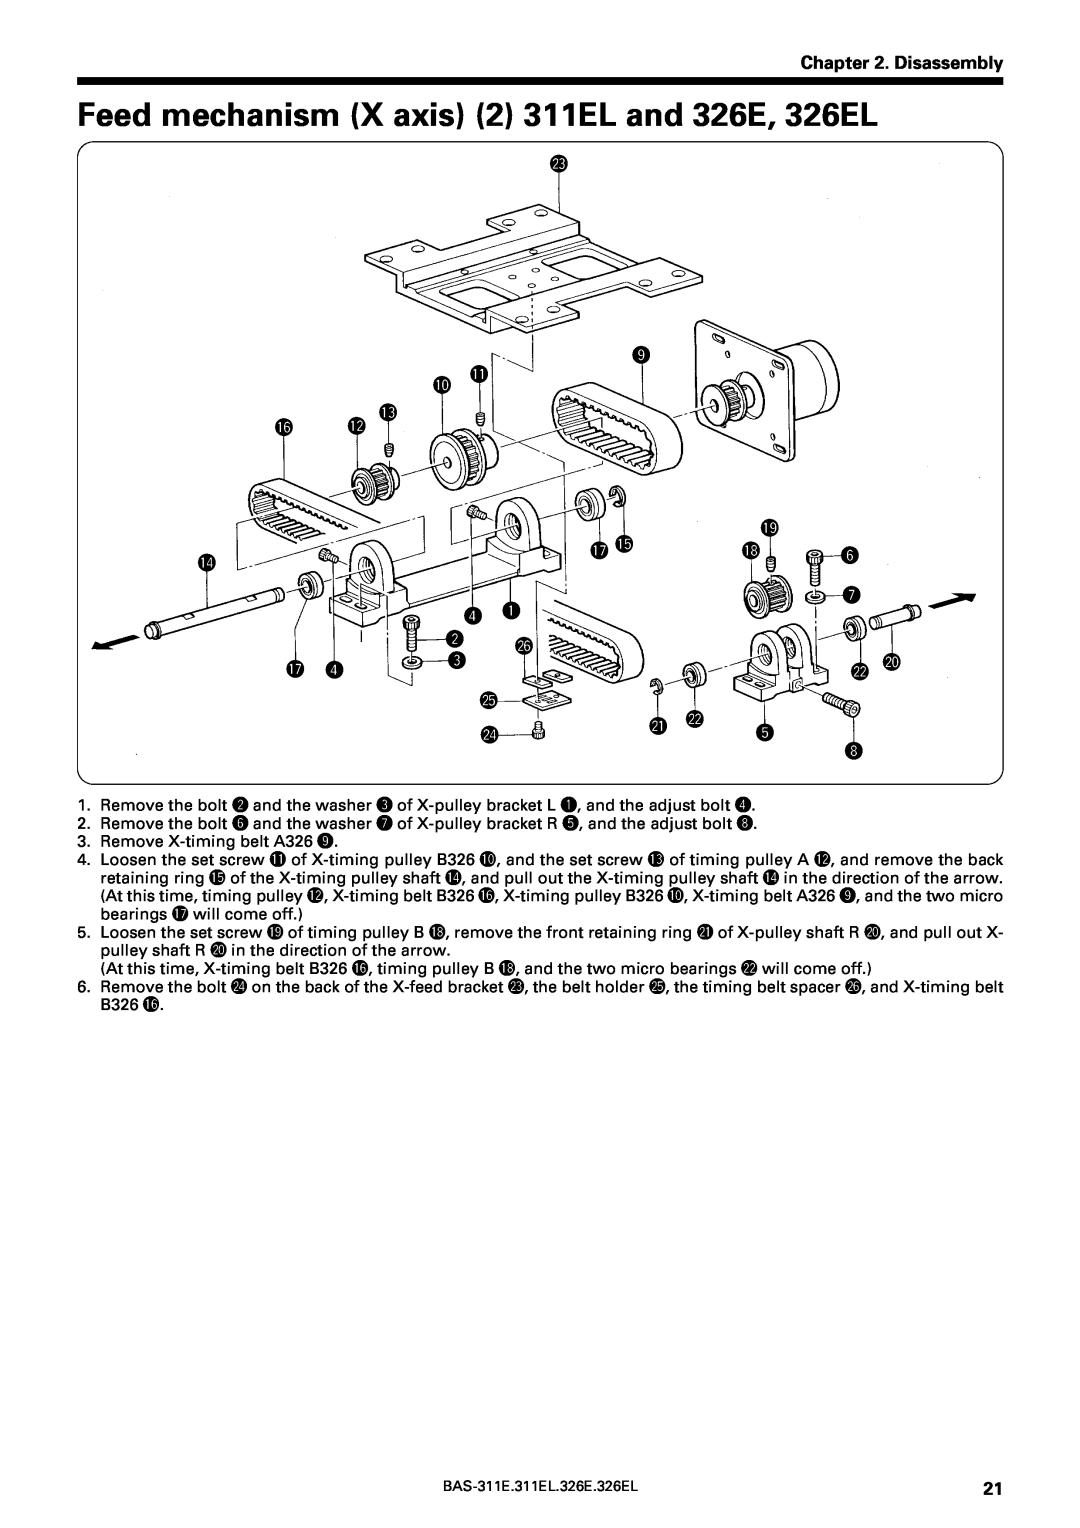 Brother BAS-311E service manual Feed mechanism X axis 2 311EL and 326E, 326EL, Disassembly, @3 o 0!1 6 !2!3, u r q, @2 @0 